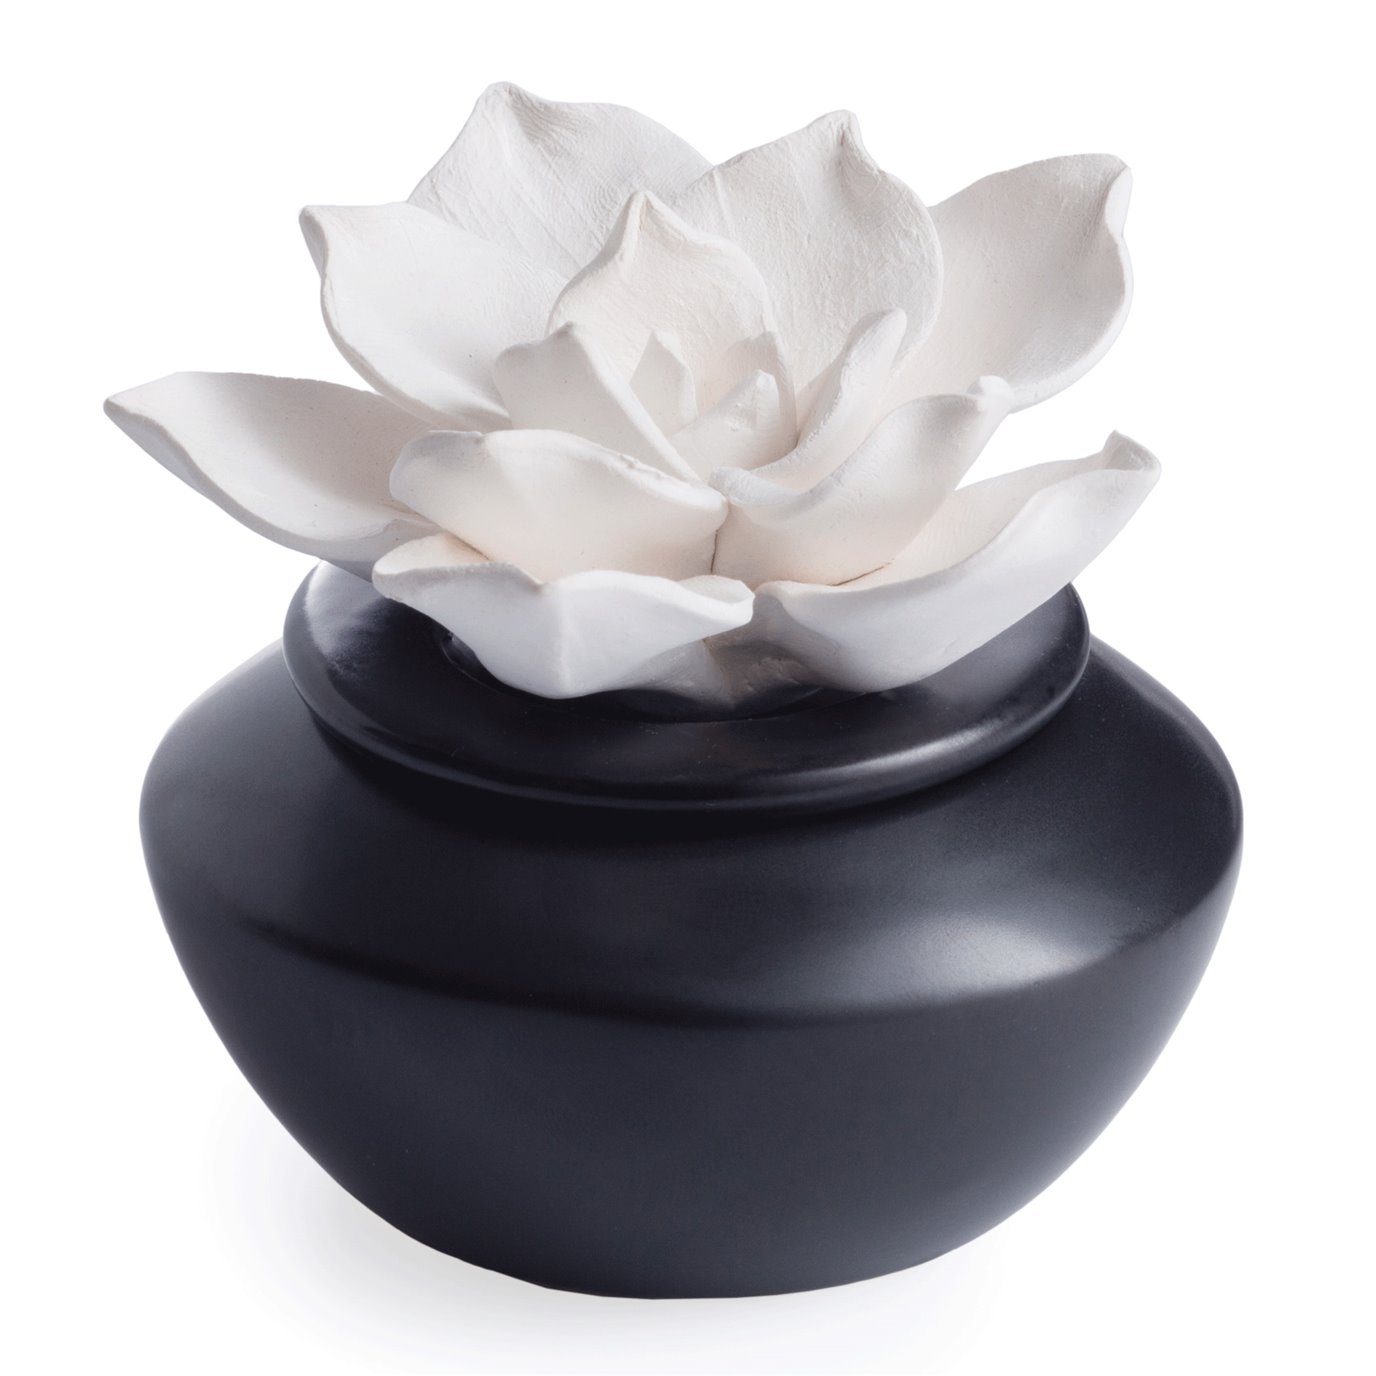 Gardenia Porcelain Aroma Oil Diffuser with Peppermint Essential Oil